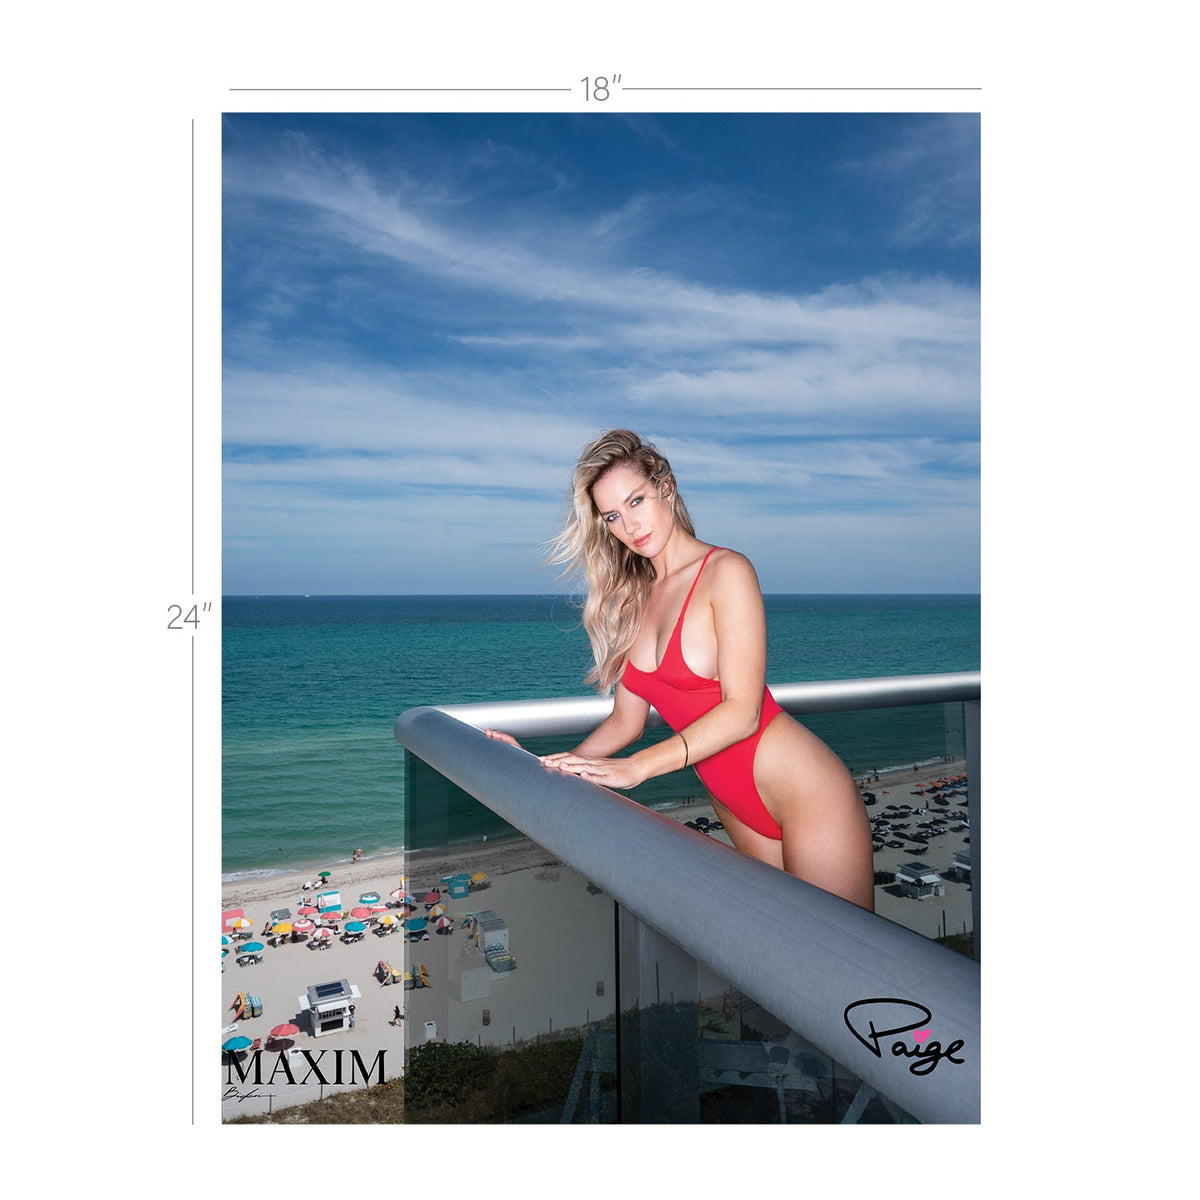 18 by 24 inch poster of Paige in red bathing suit